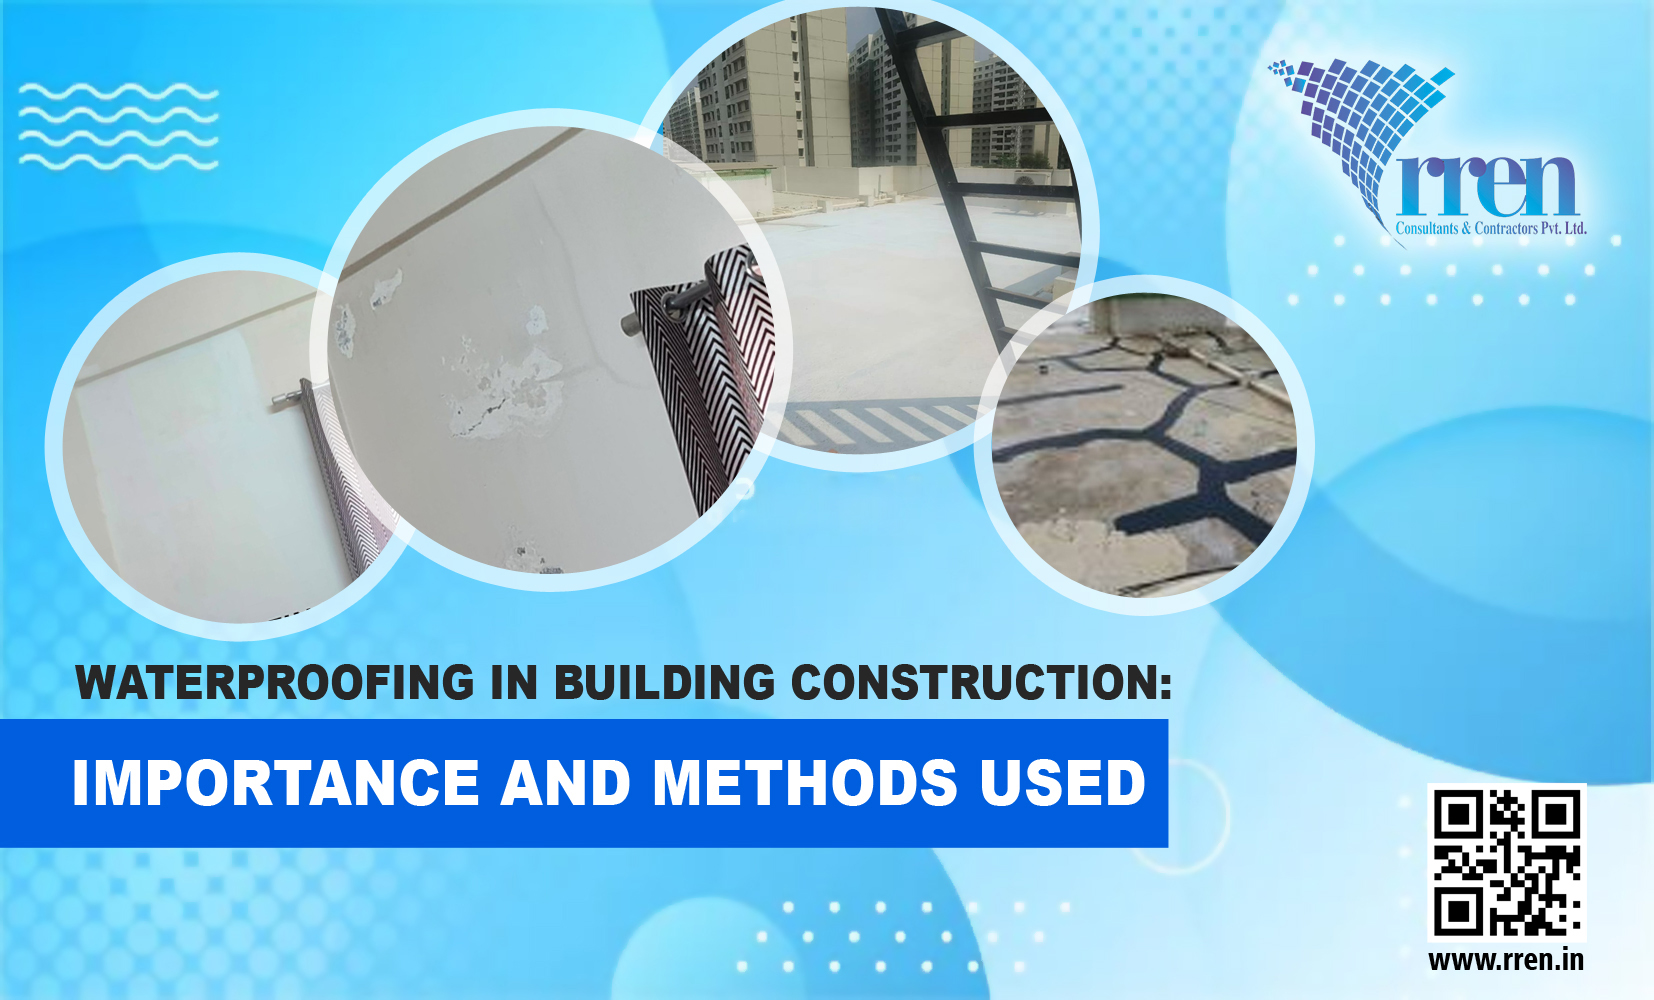 Waterproofing in building construction: Importance and Methods Used